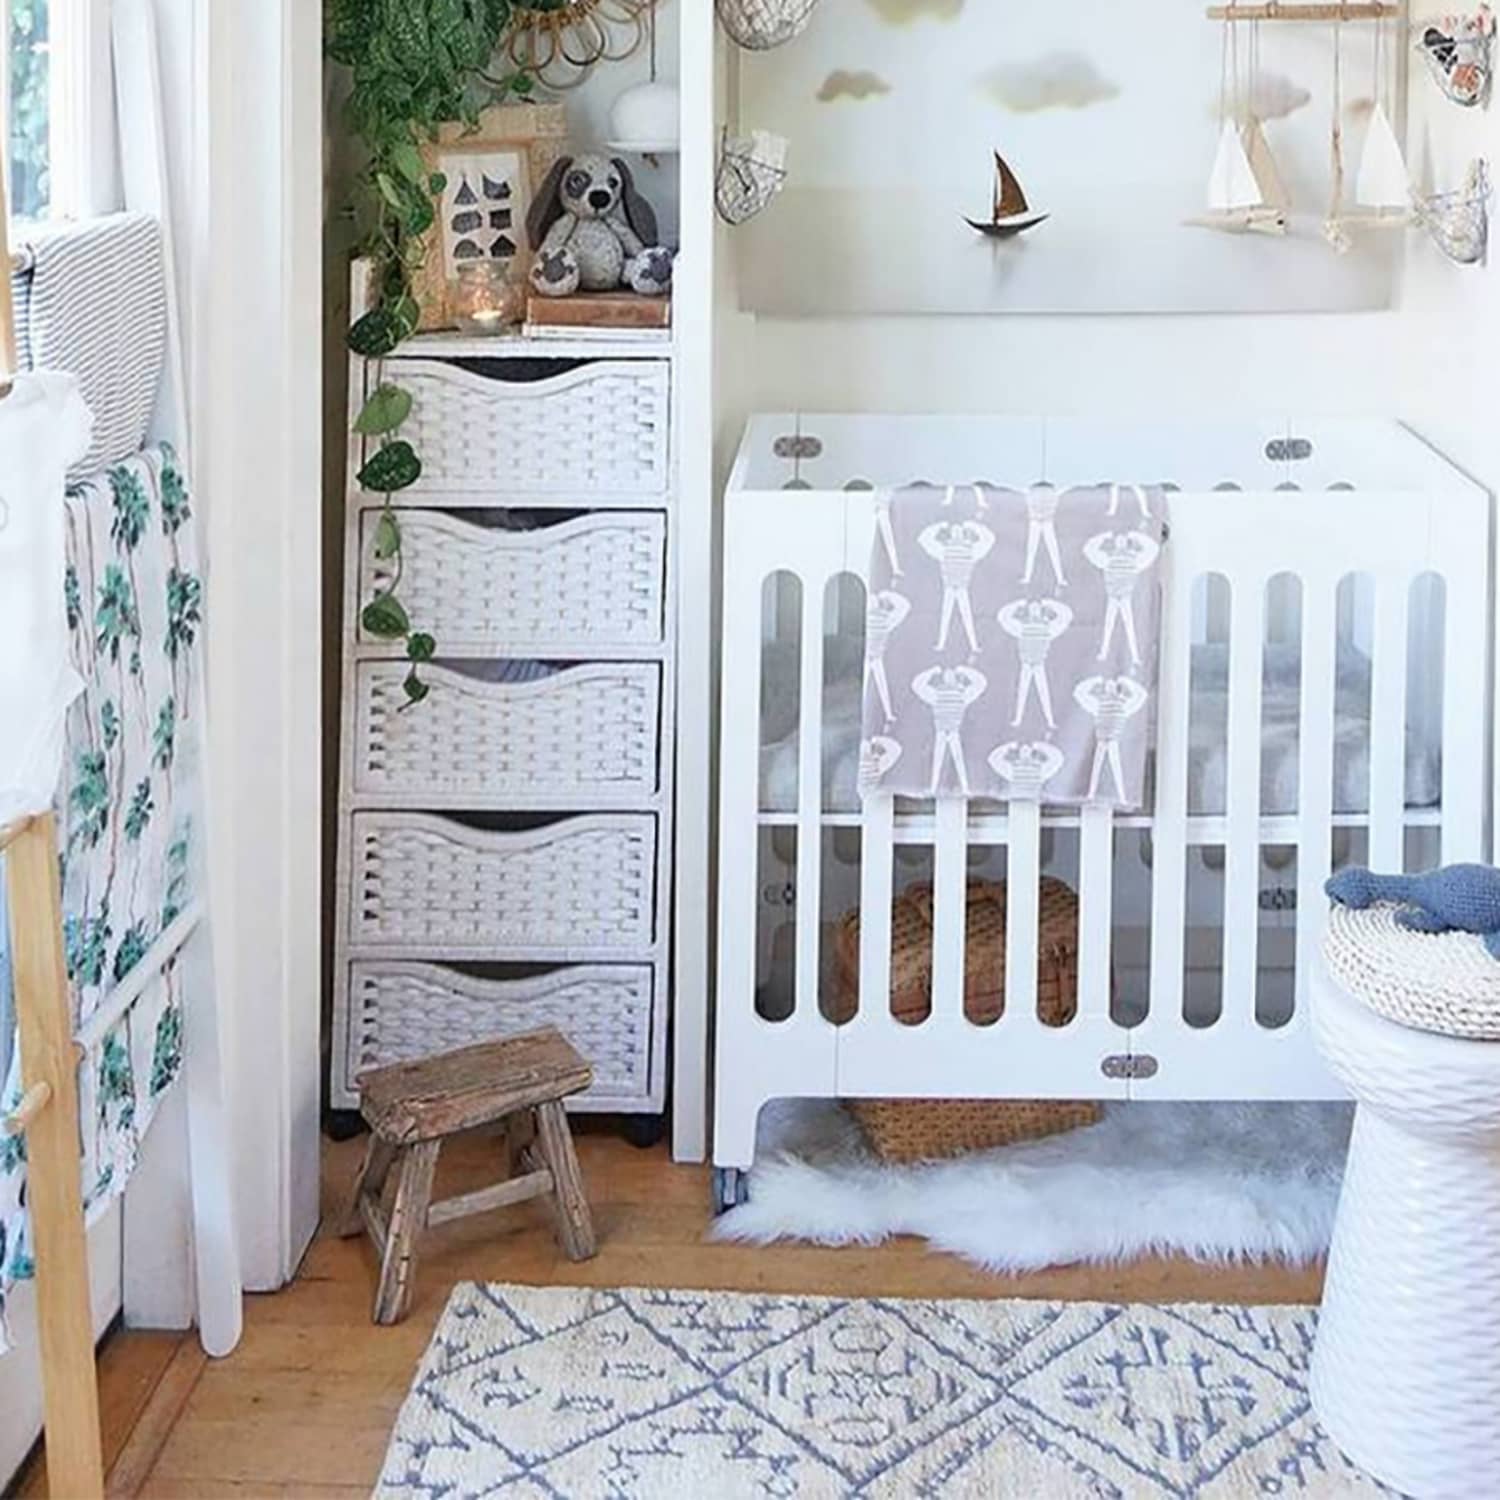 How To Fit A Nursery Into Your Very Small Space Apartment